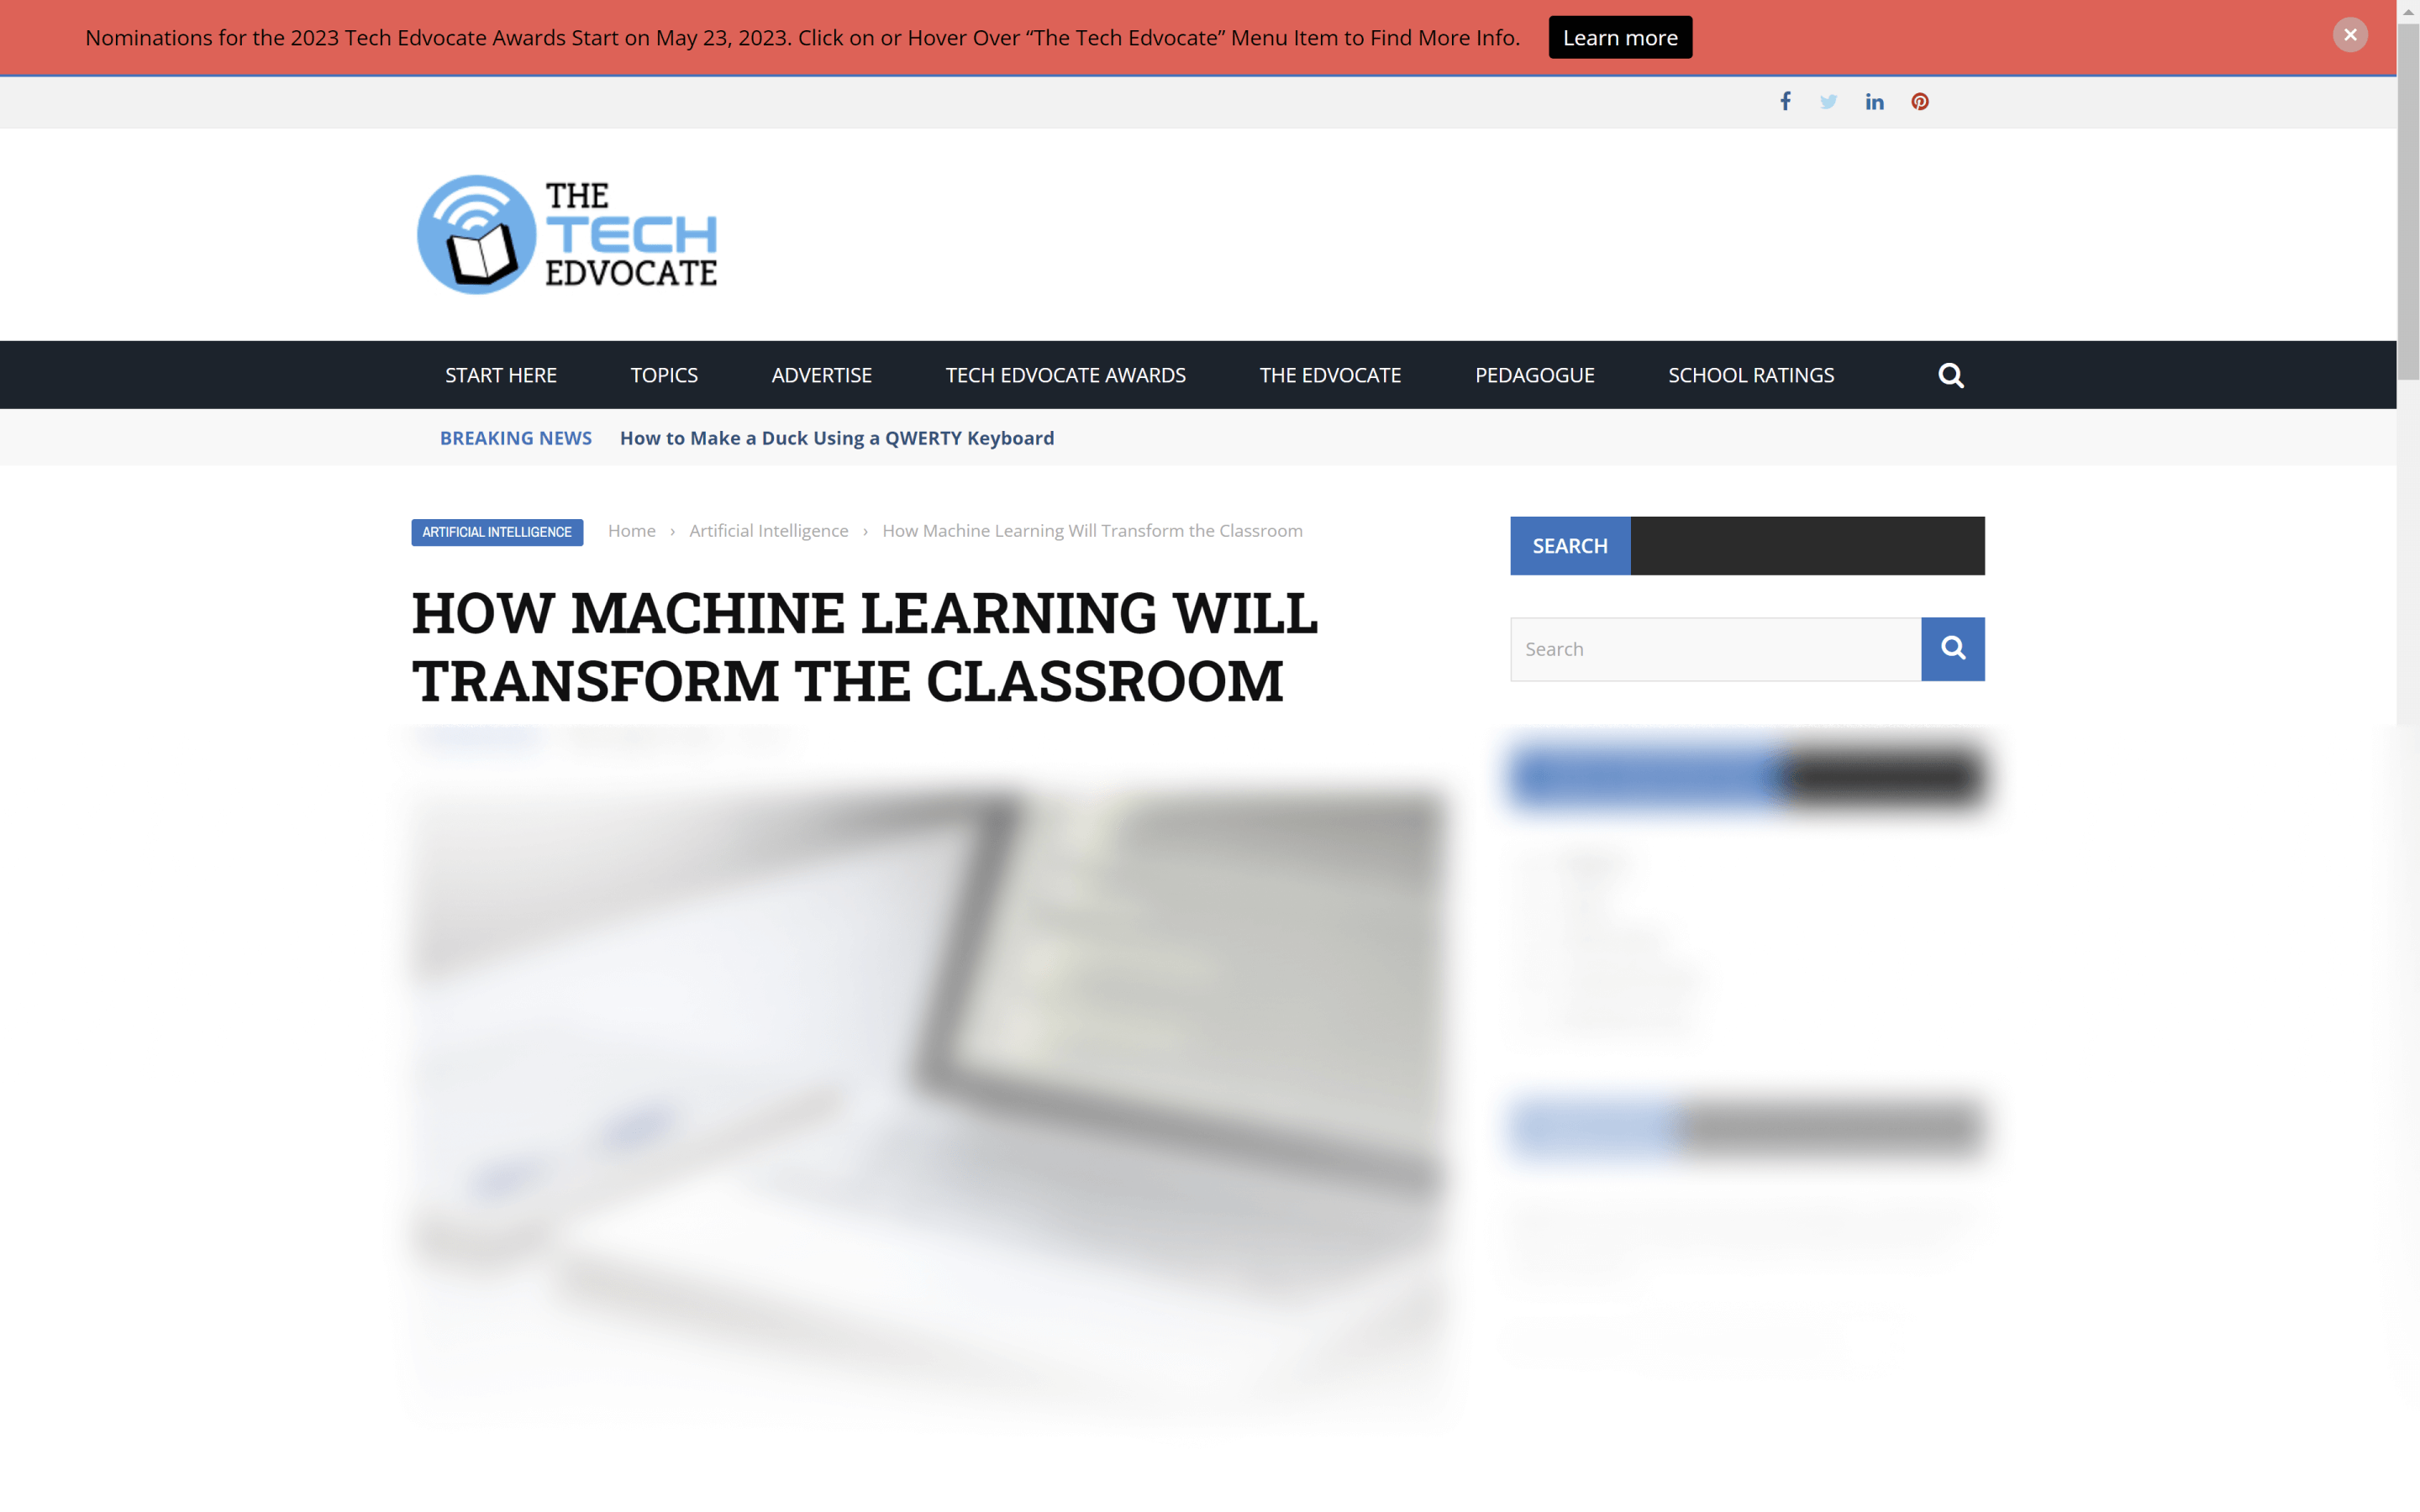 How machine learning will transform the classroom